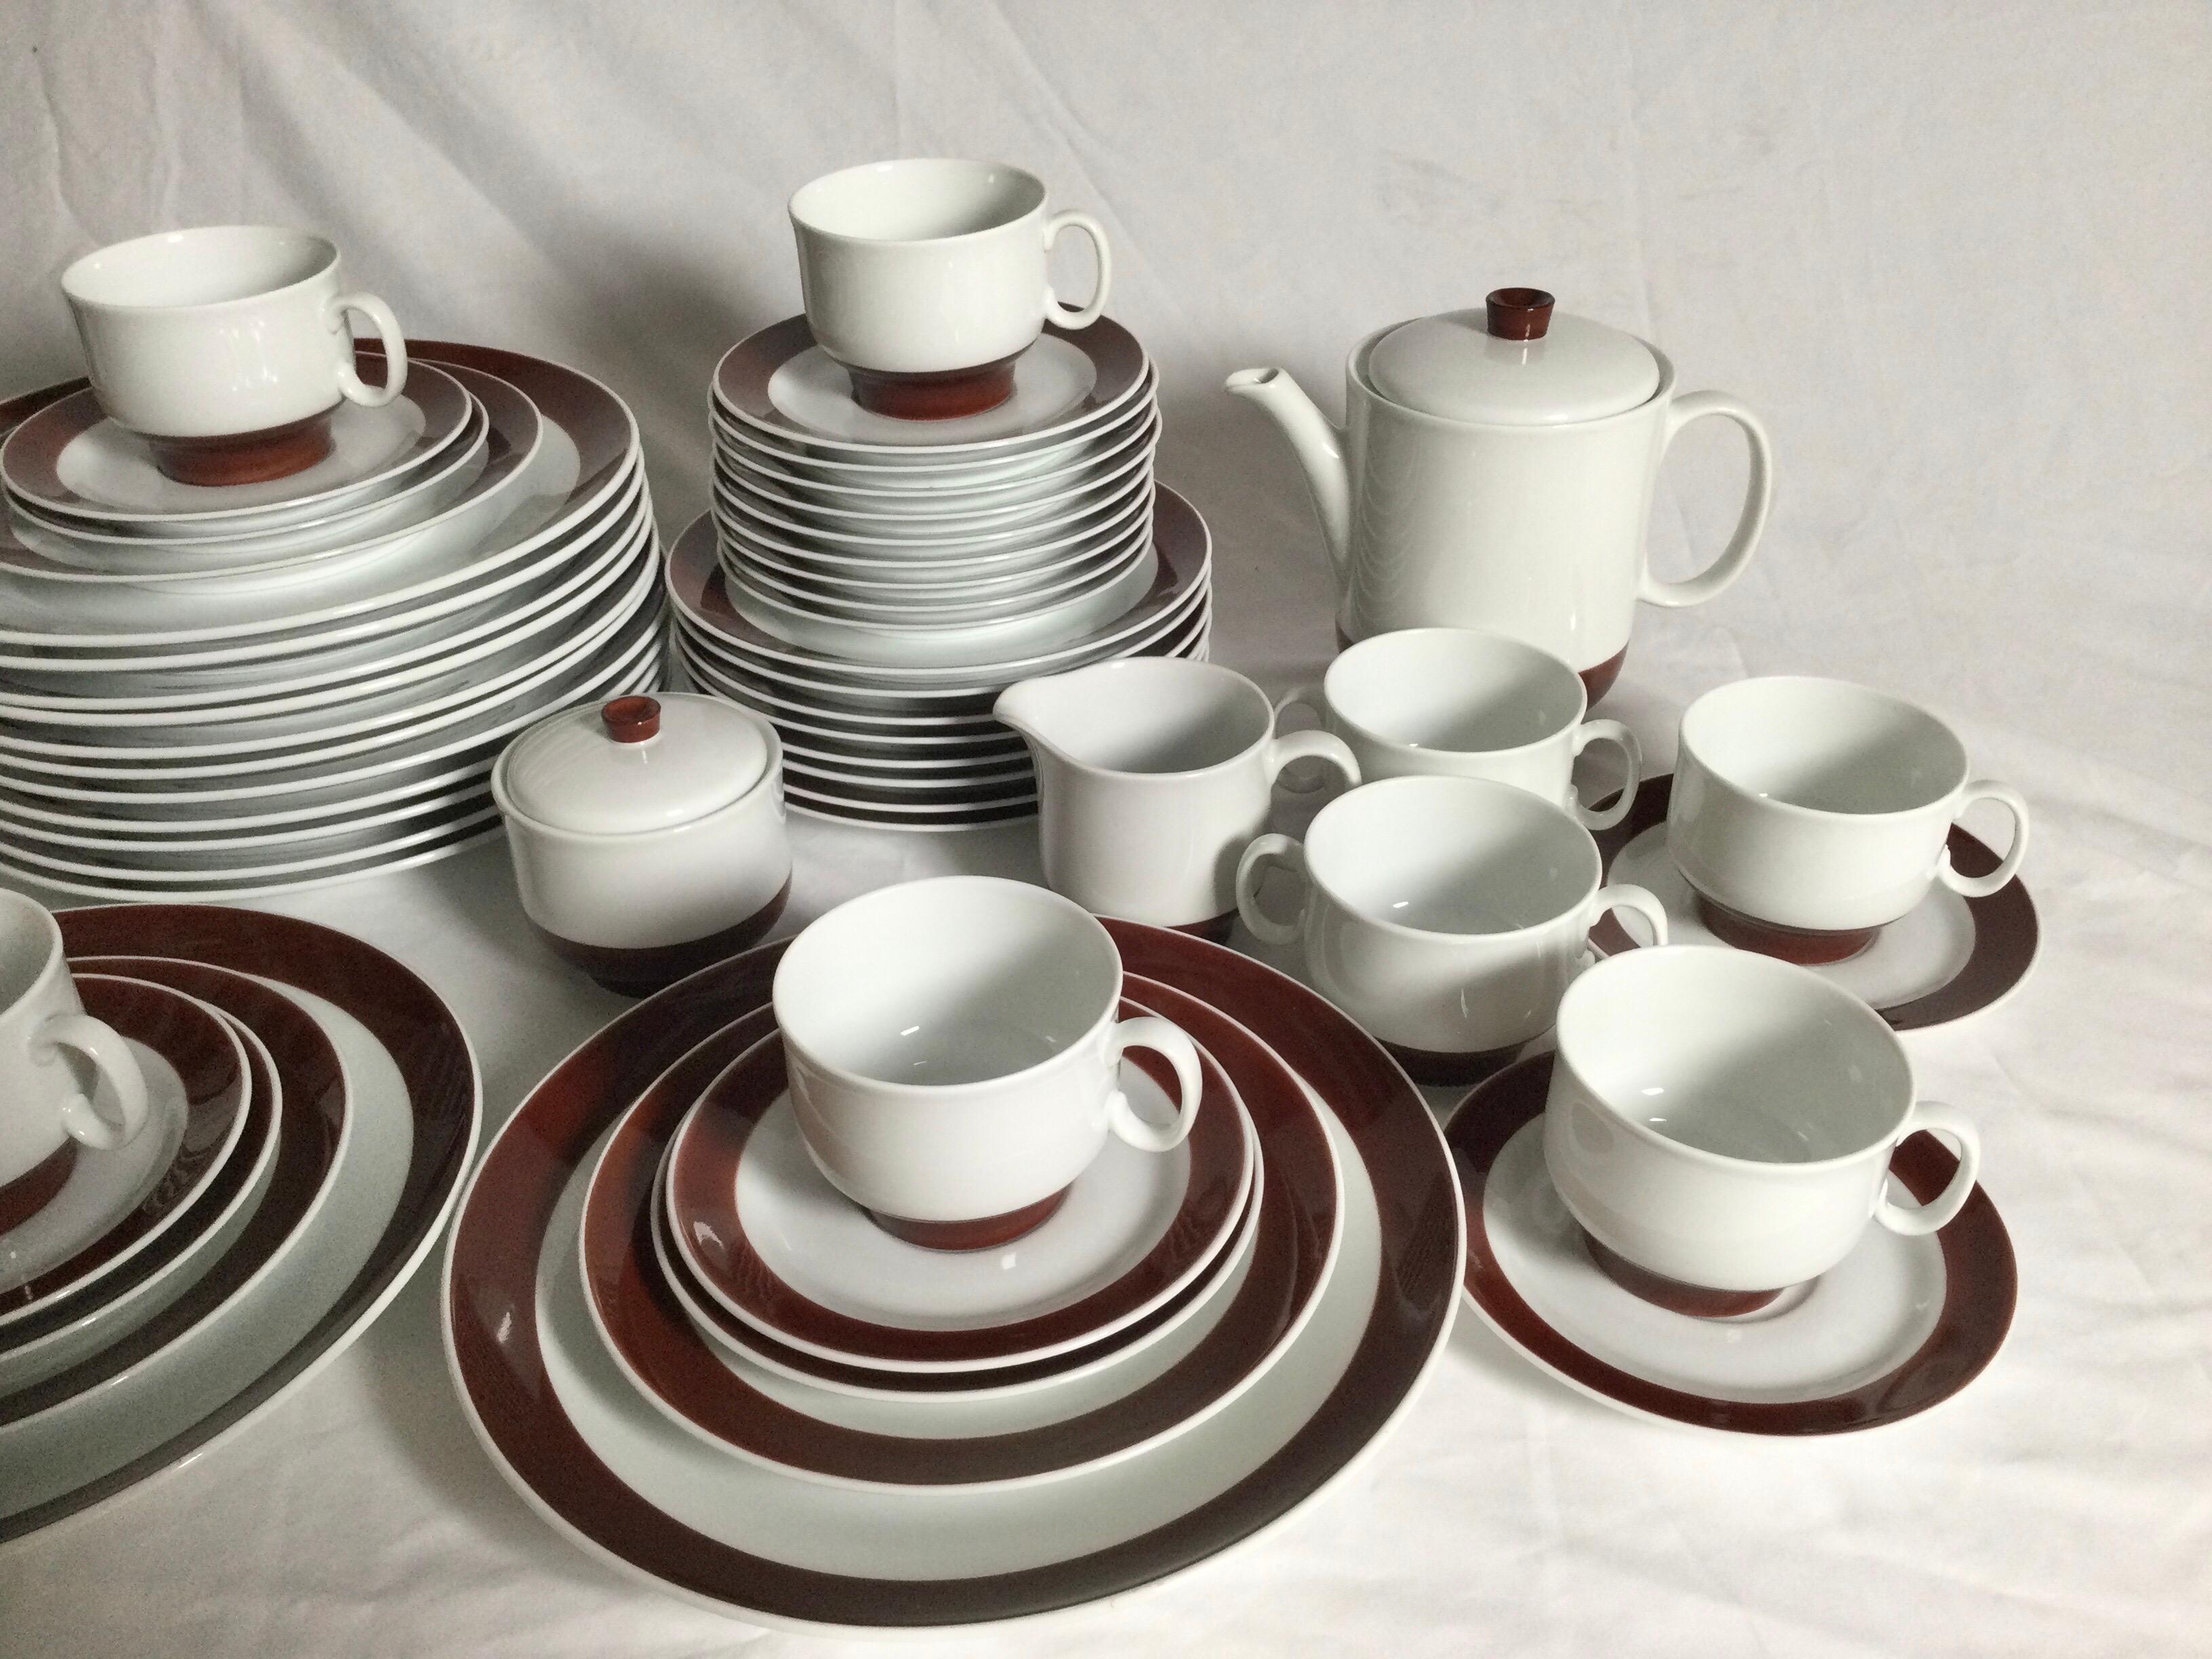 A rare beauty, Richard Ginori Italian porcelain dinnerware set with a rich and bold mocha stripe. The set consisting of 12 dinner plates, 12 salad plates, 12 dessert plates, 8 soup bowls, 10 footed cups, 9 saucers, 2 cream soup bowl, 1 covered